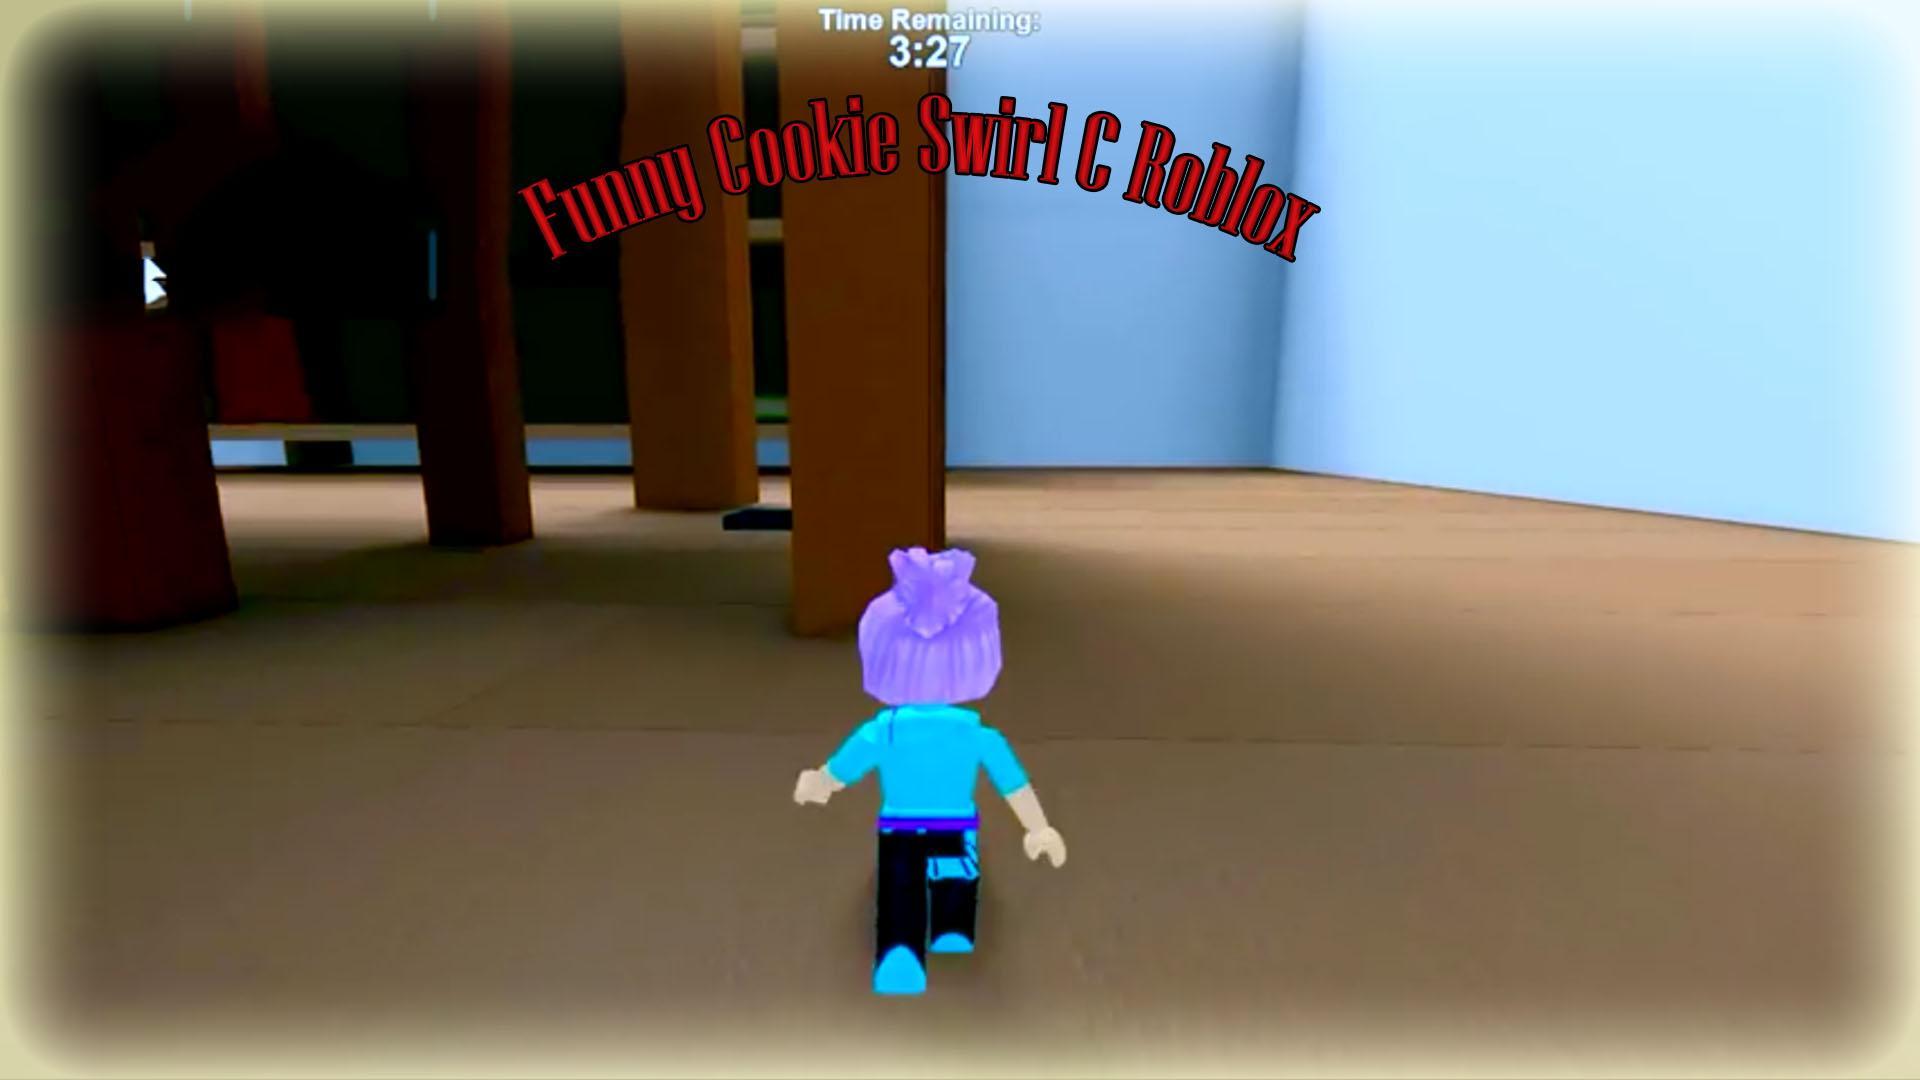 Tips For Cookie Swirl C Funny Roblox Pro Guide For Android - funny picture 3 roblox